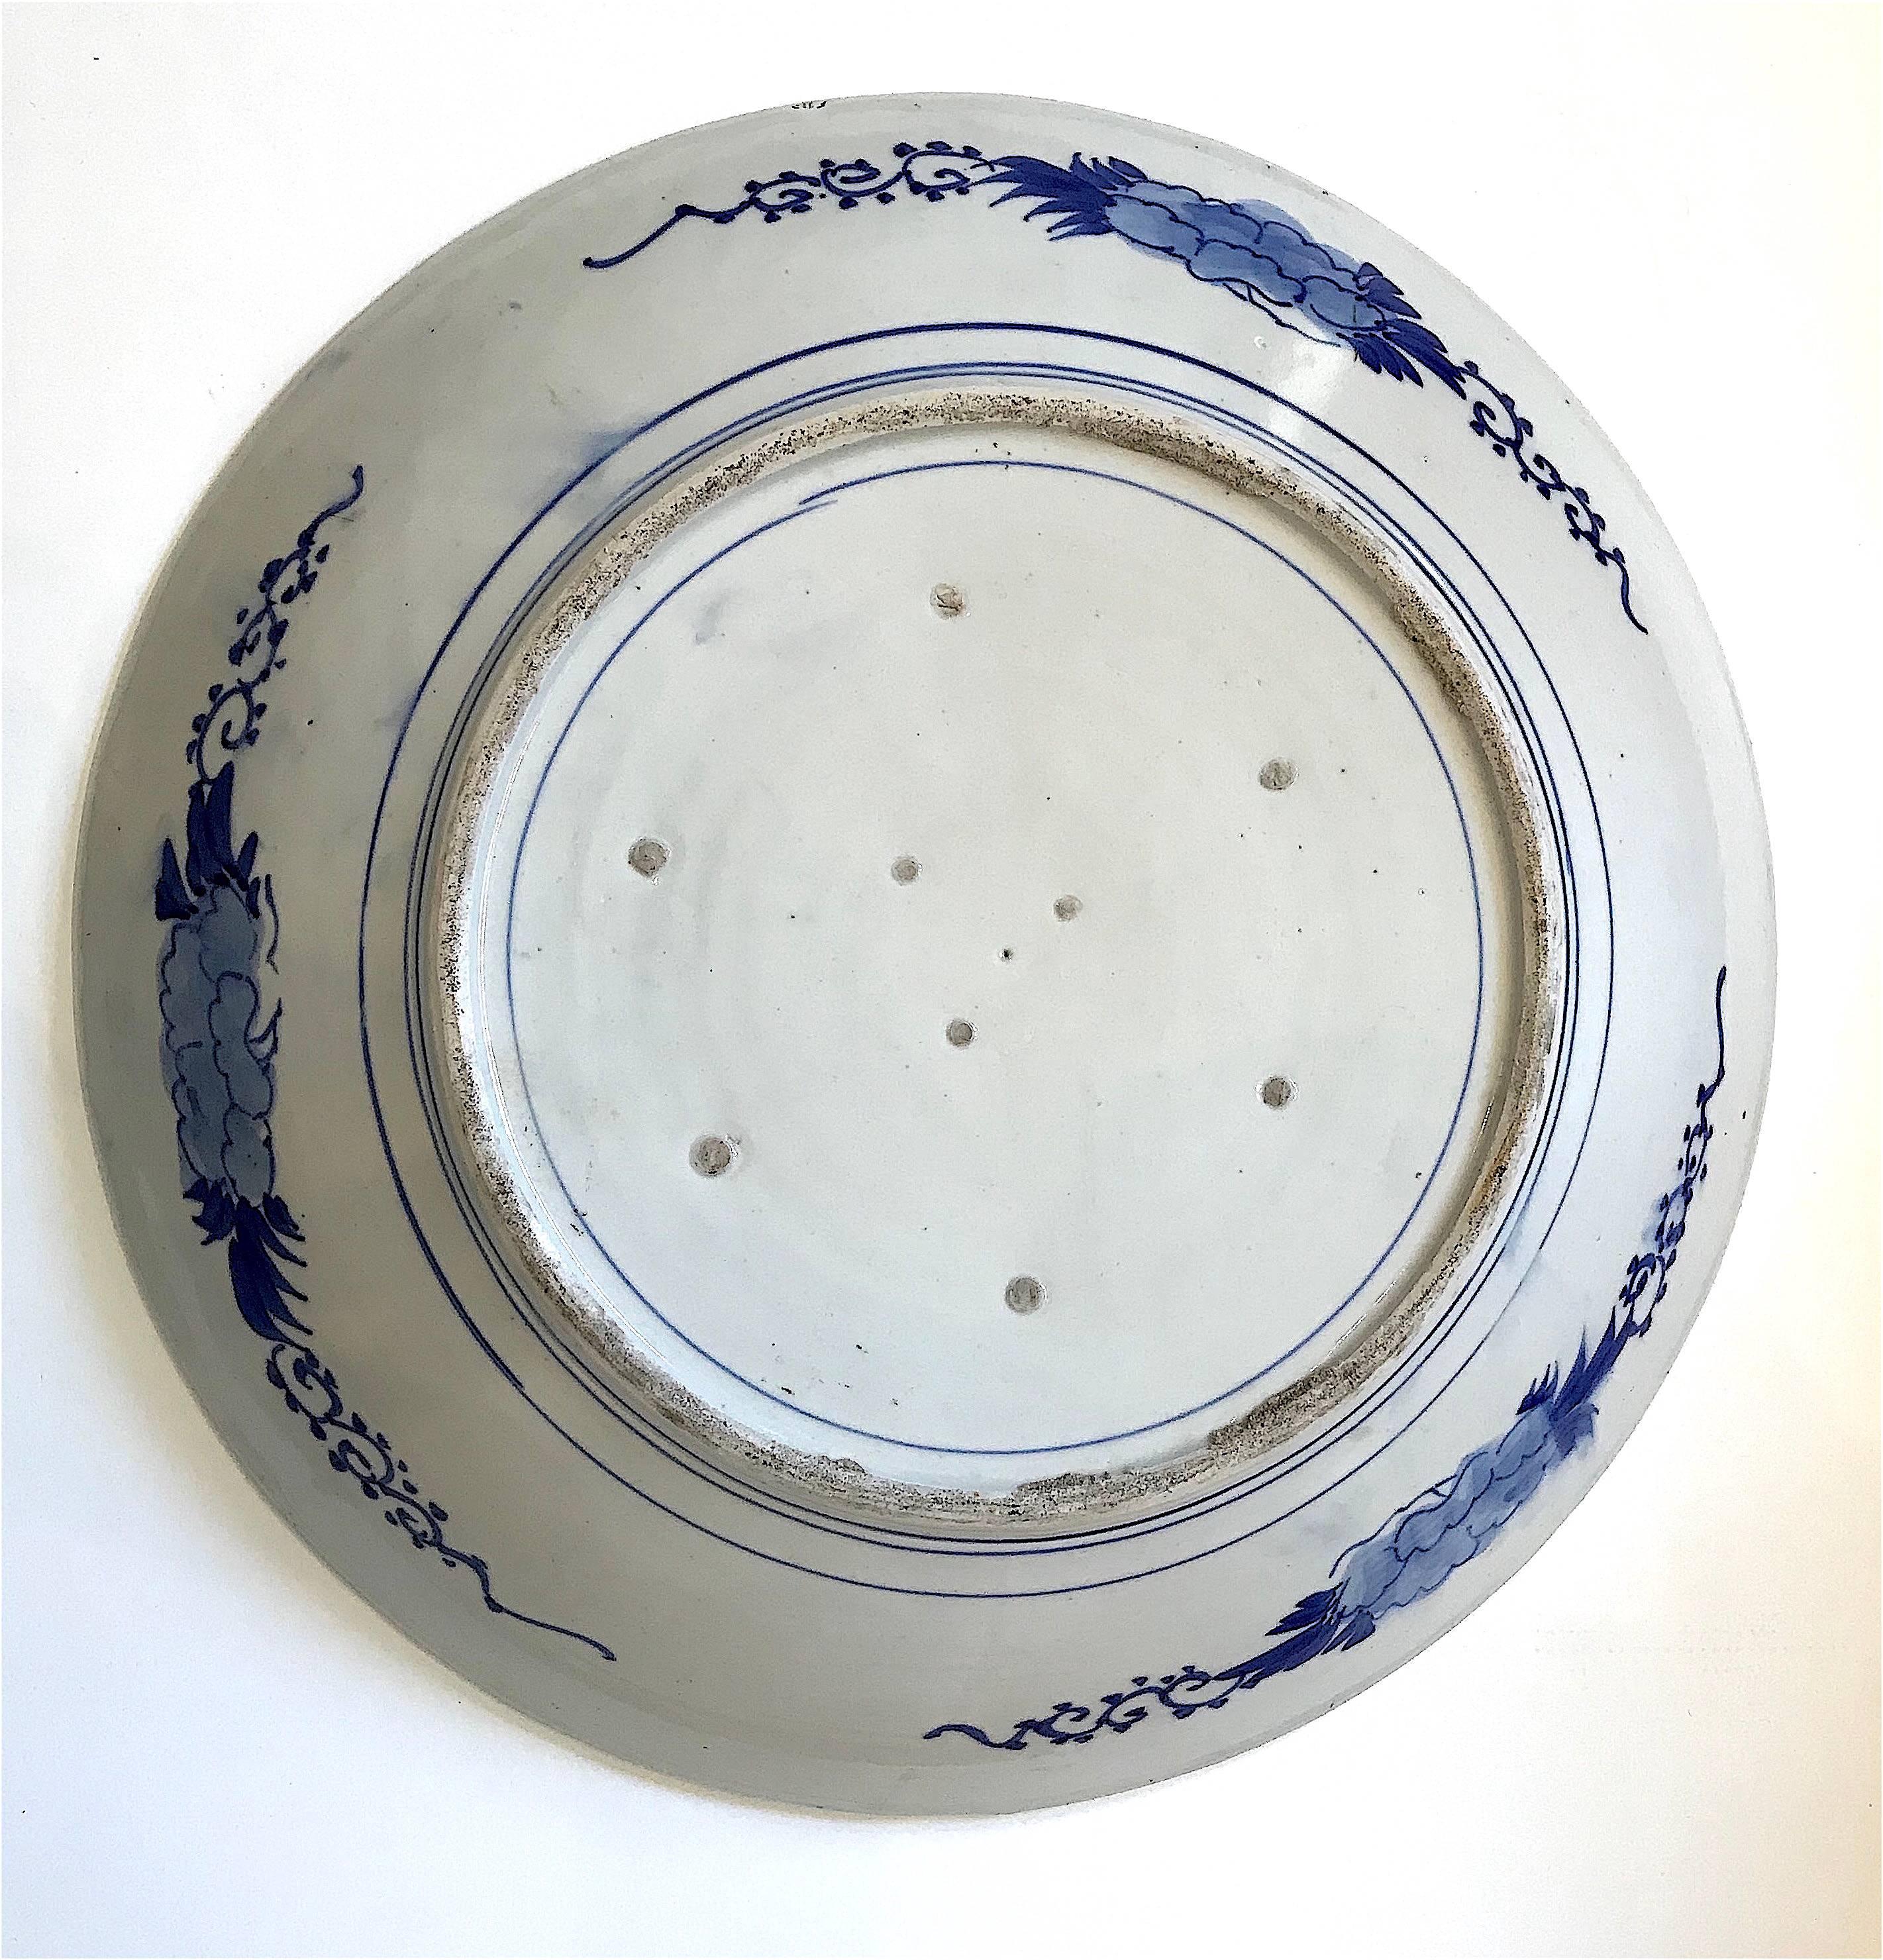 Impressive example of 19th century Japanese porcelain art, this massive and very beautiful charger features an evocative rendition of the 'koi' or carp, with its symbolic reference to good luck and good fortune, in blue on white. In excellent